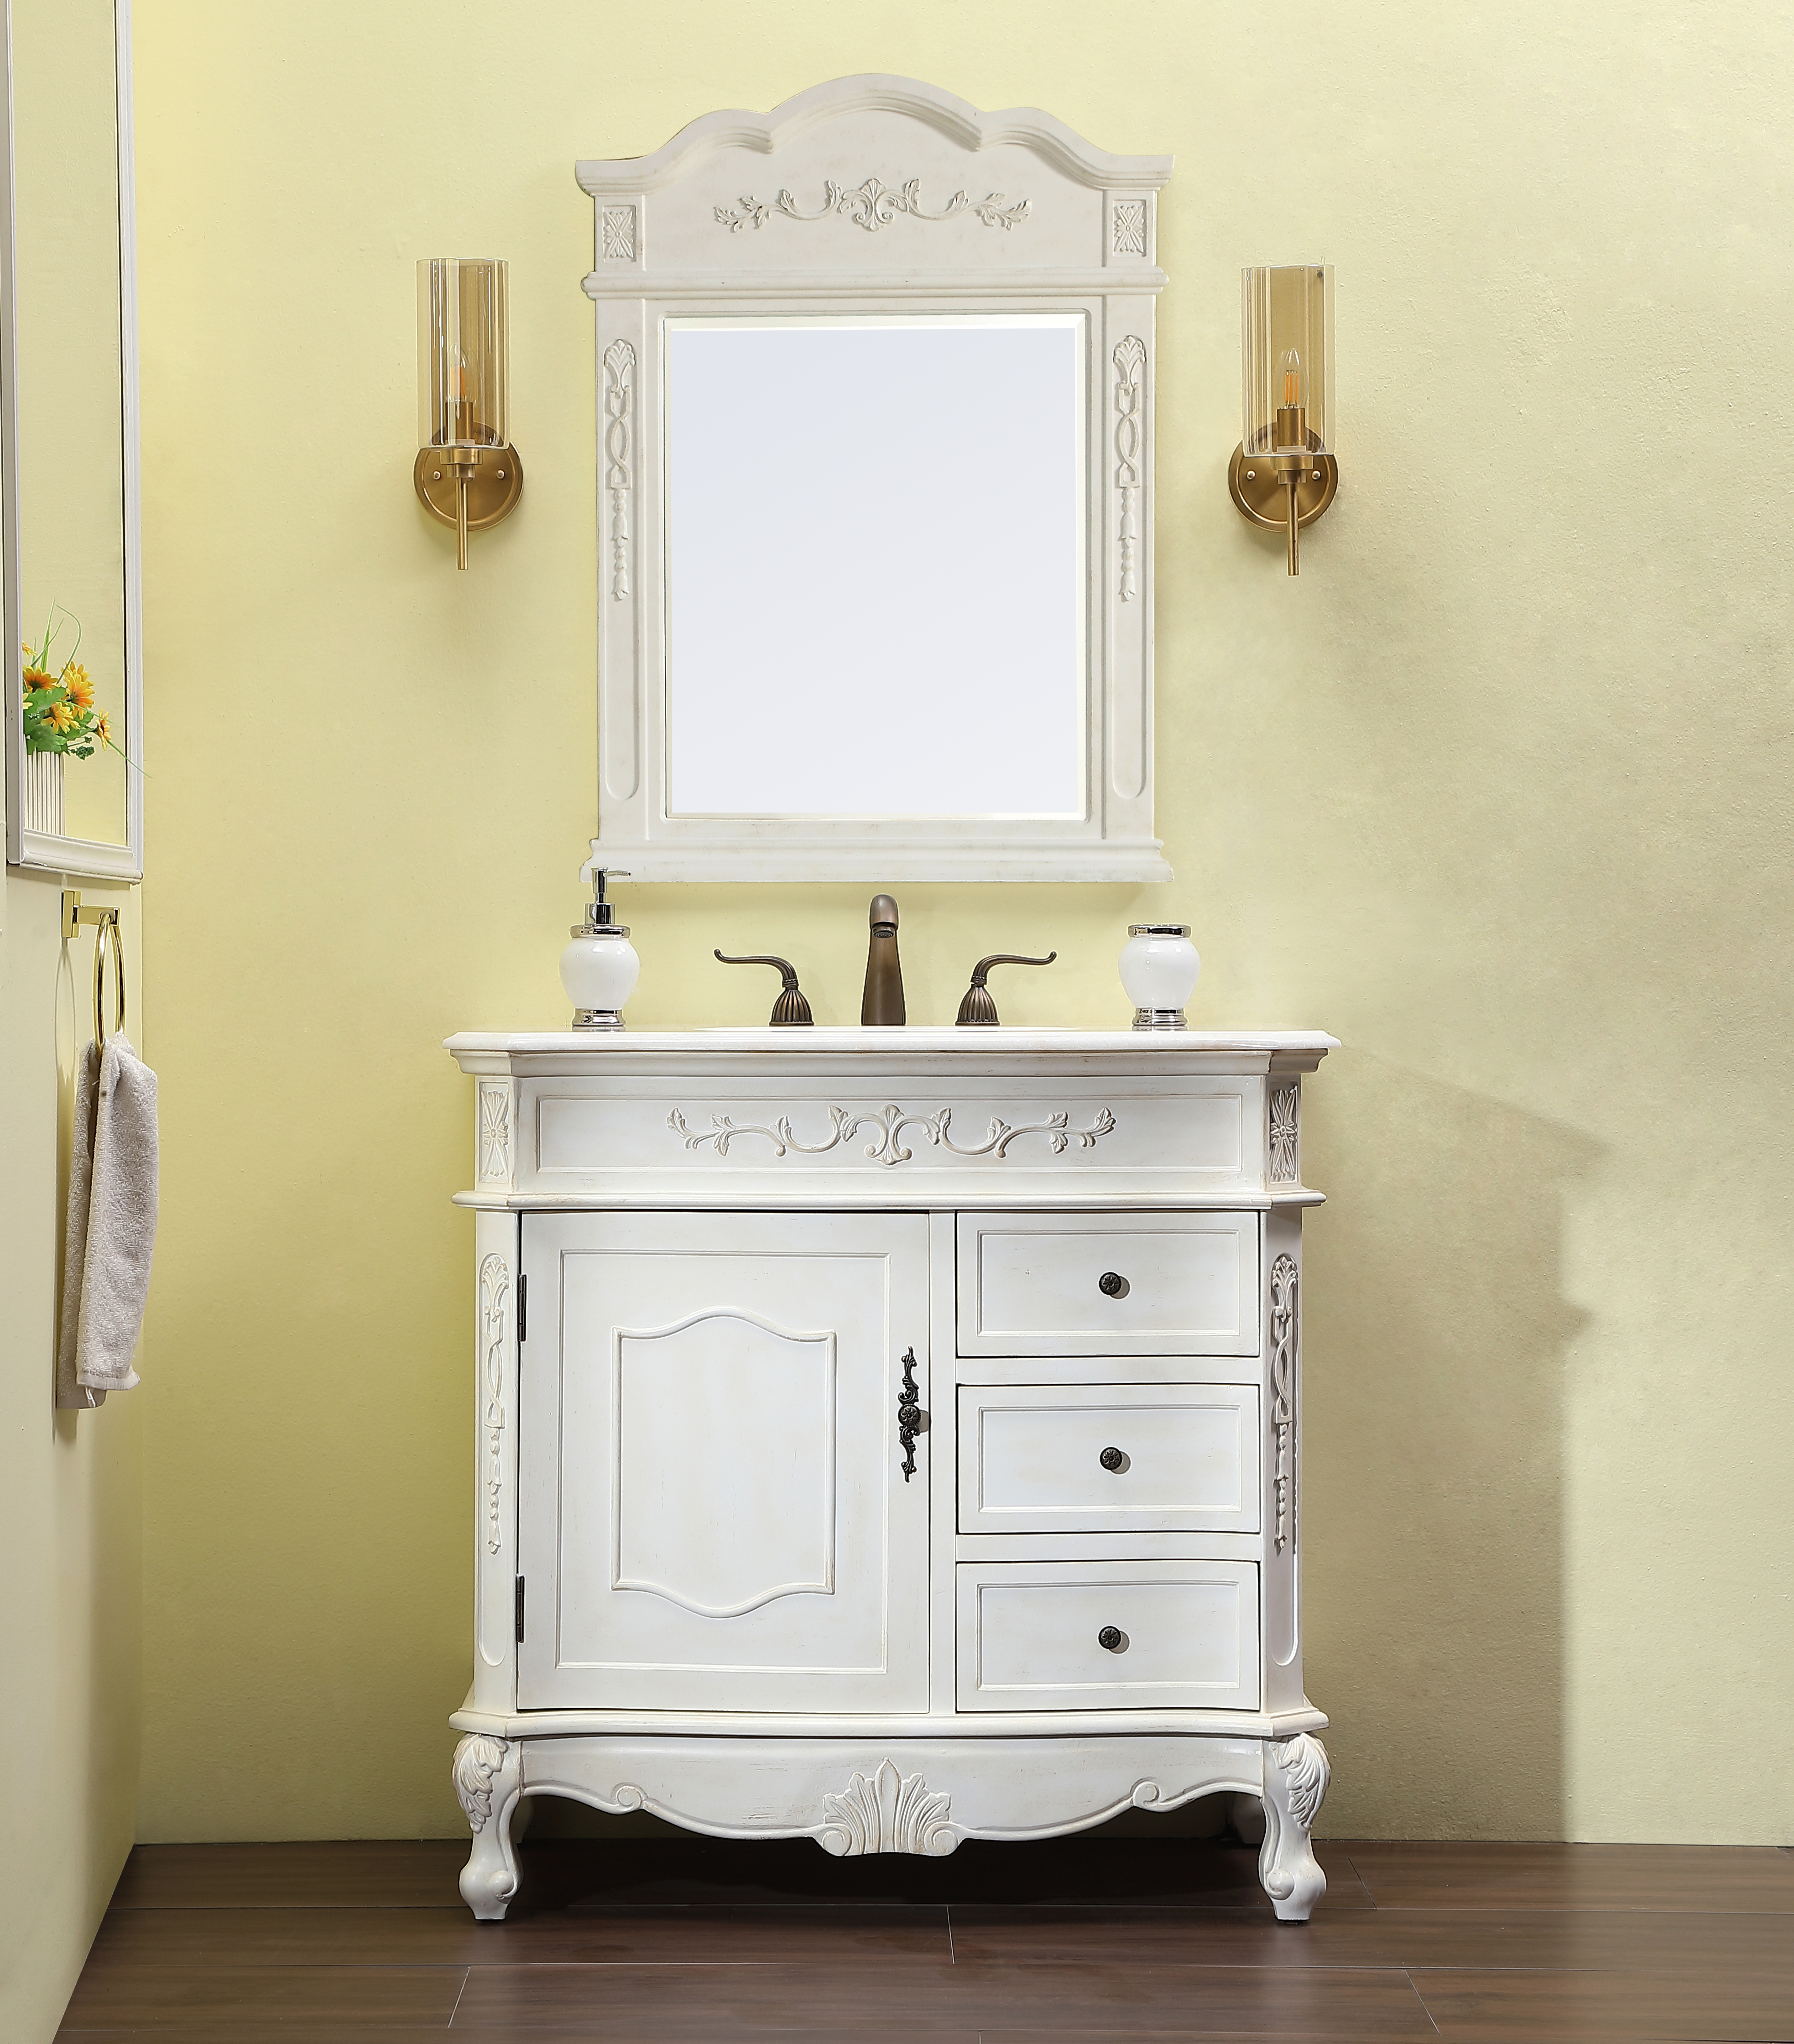 36" Antique White Finish Vanity with Mirror, Med Cab, and Linen Cabinet Options 